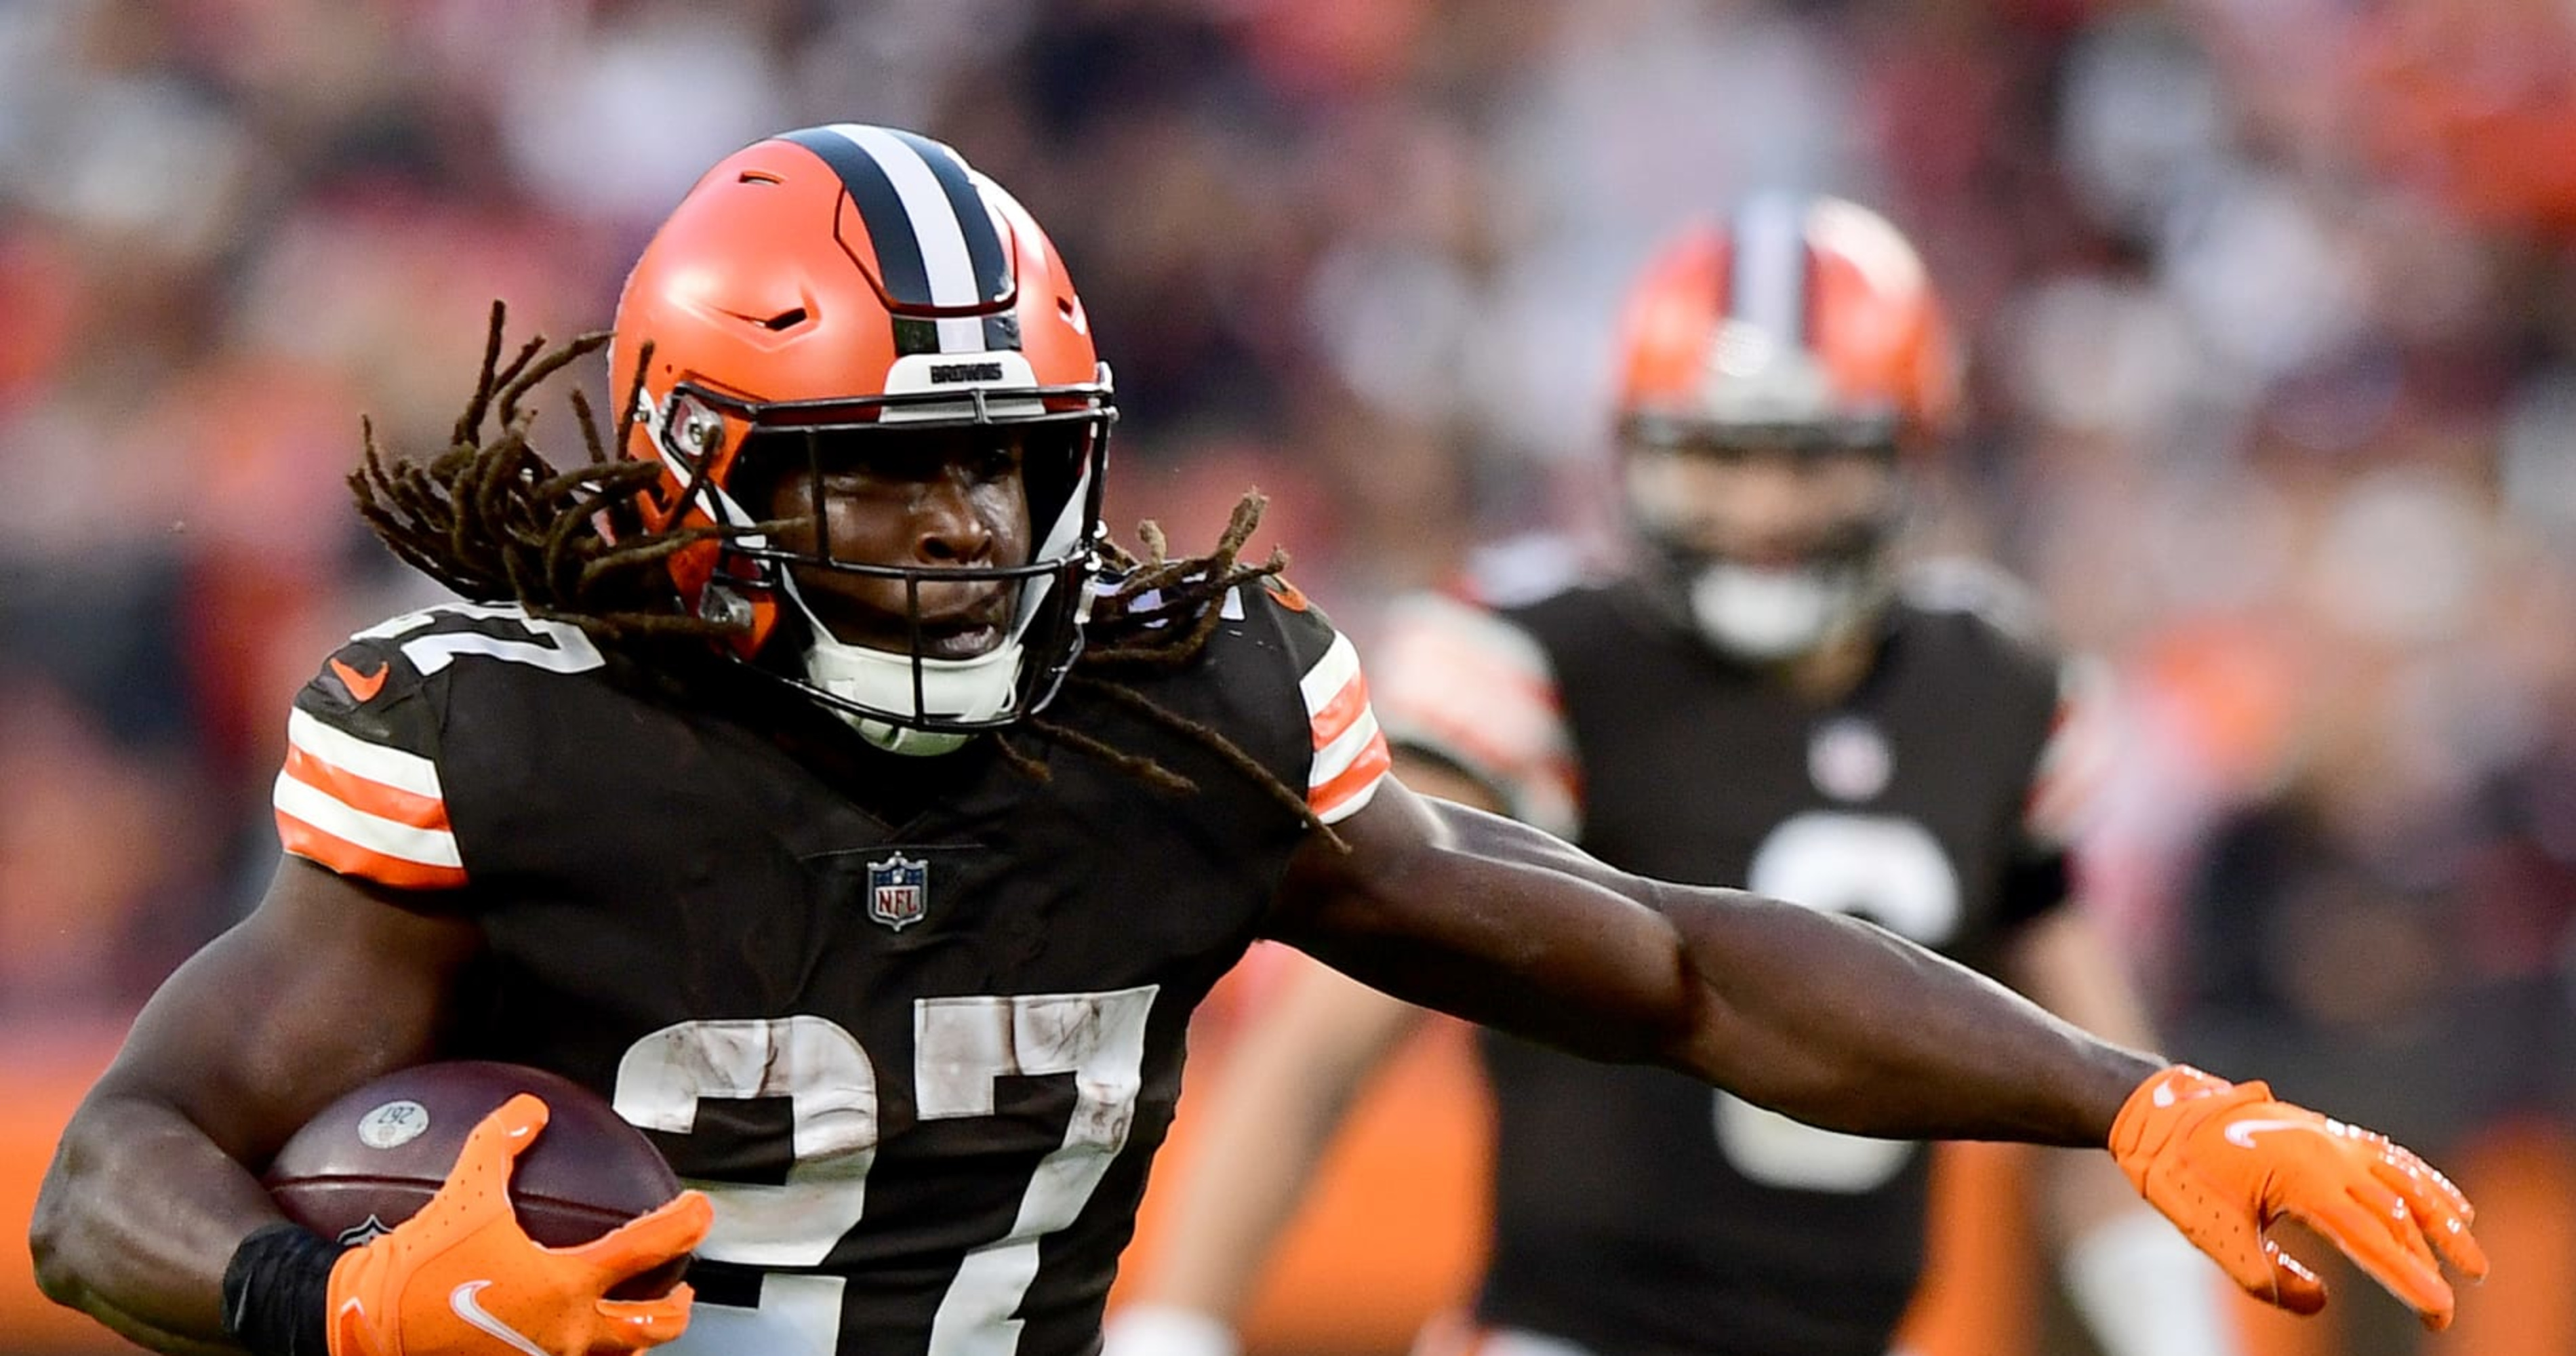 Nfl Rumors Kareem Hunt To Visit Colts In Free Agency Amid Saints Contract Buzz News Scores 8453